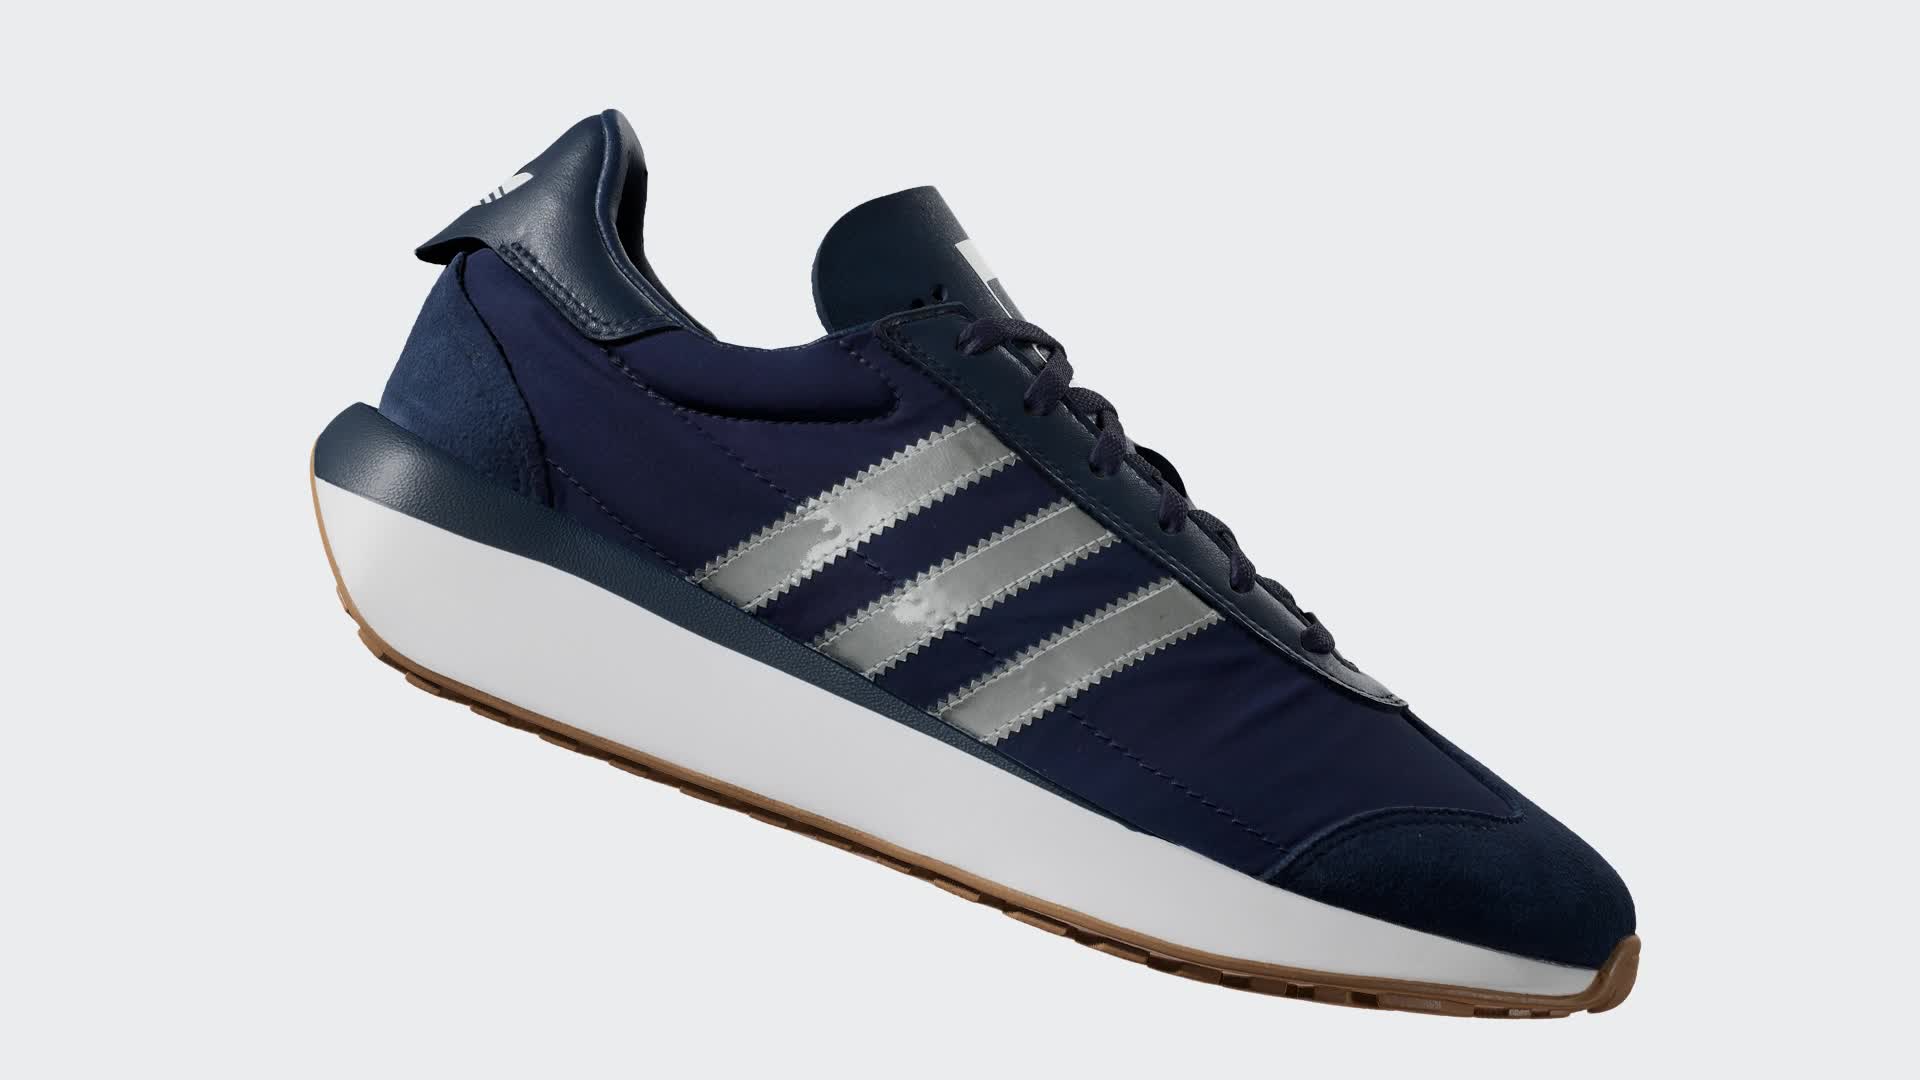 adidas Country XLG Shoes - Blue | Men's Lifestyle | adidas US